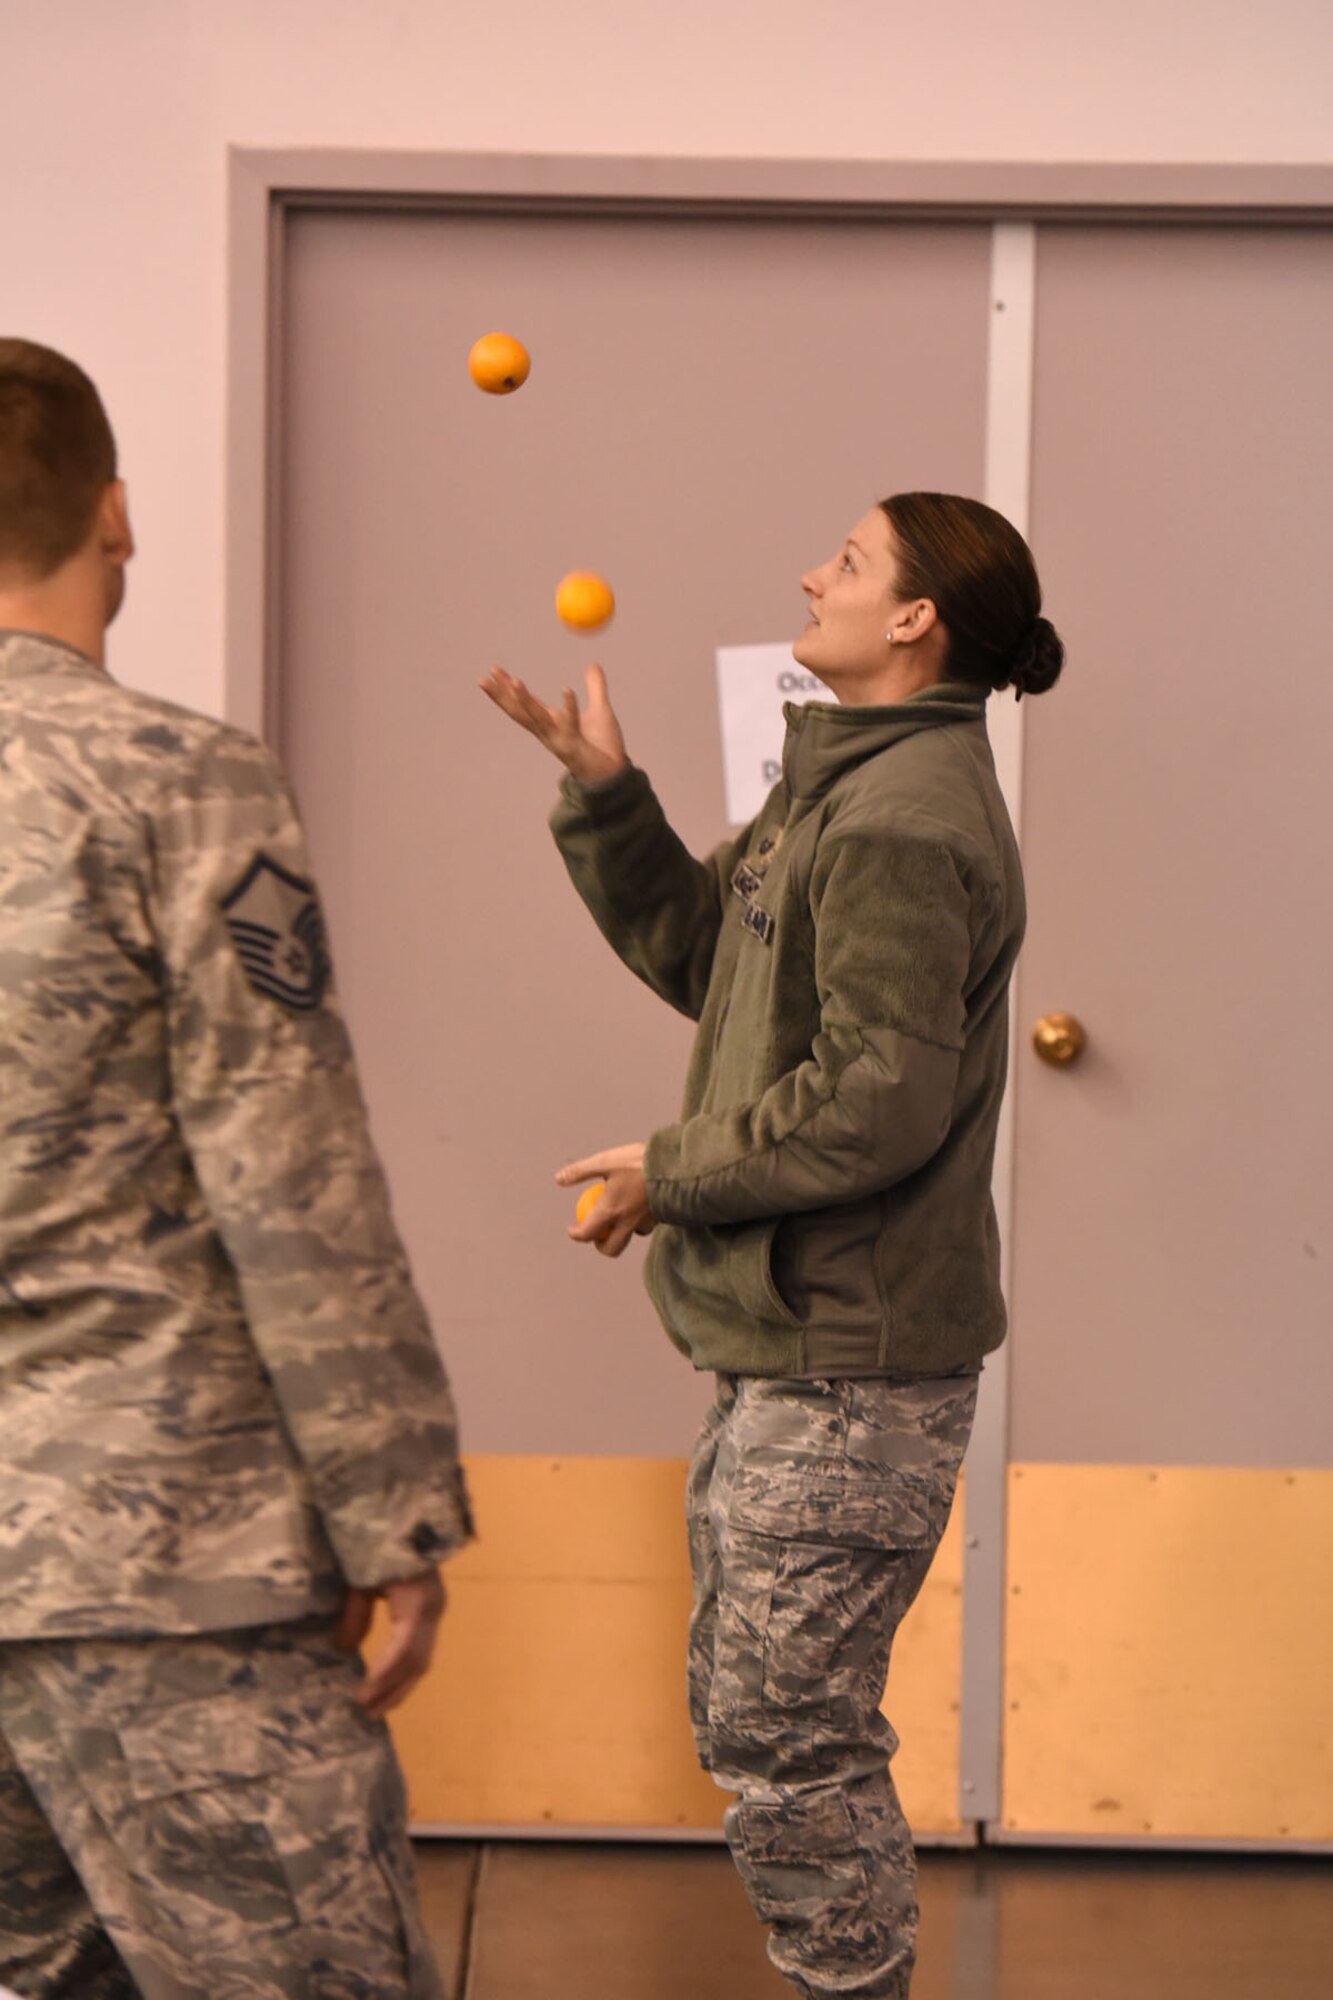 Tech. Sgt. Amanda McKnight, a 120th Security Forces Squadron security forces specialist, juggles oranges during a crowd participation exercise during the 120th Airlift Wing’s 2016 Wingman Day event December 3, 2016 at the Mansfield Center in Great Falls, Montana. The crowd participation exercise required individuals to share with their groups some unique fact about themselves. (U.S. Air National Guard photo/Master Sgt. Michael Touchette)